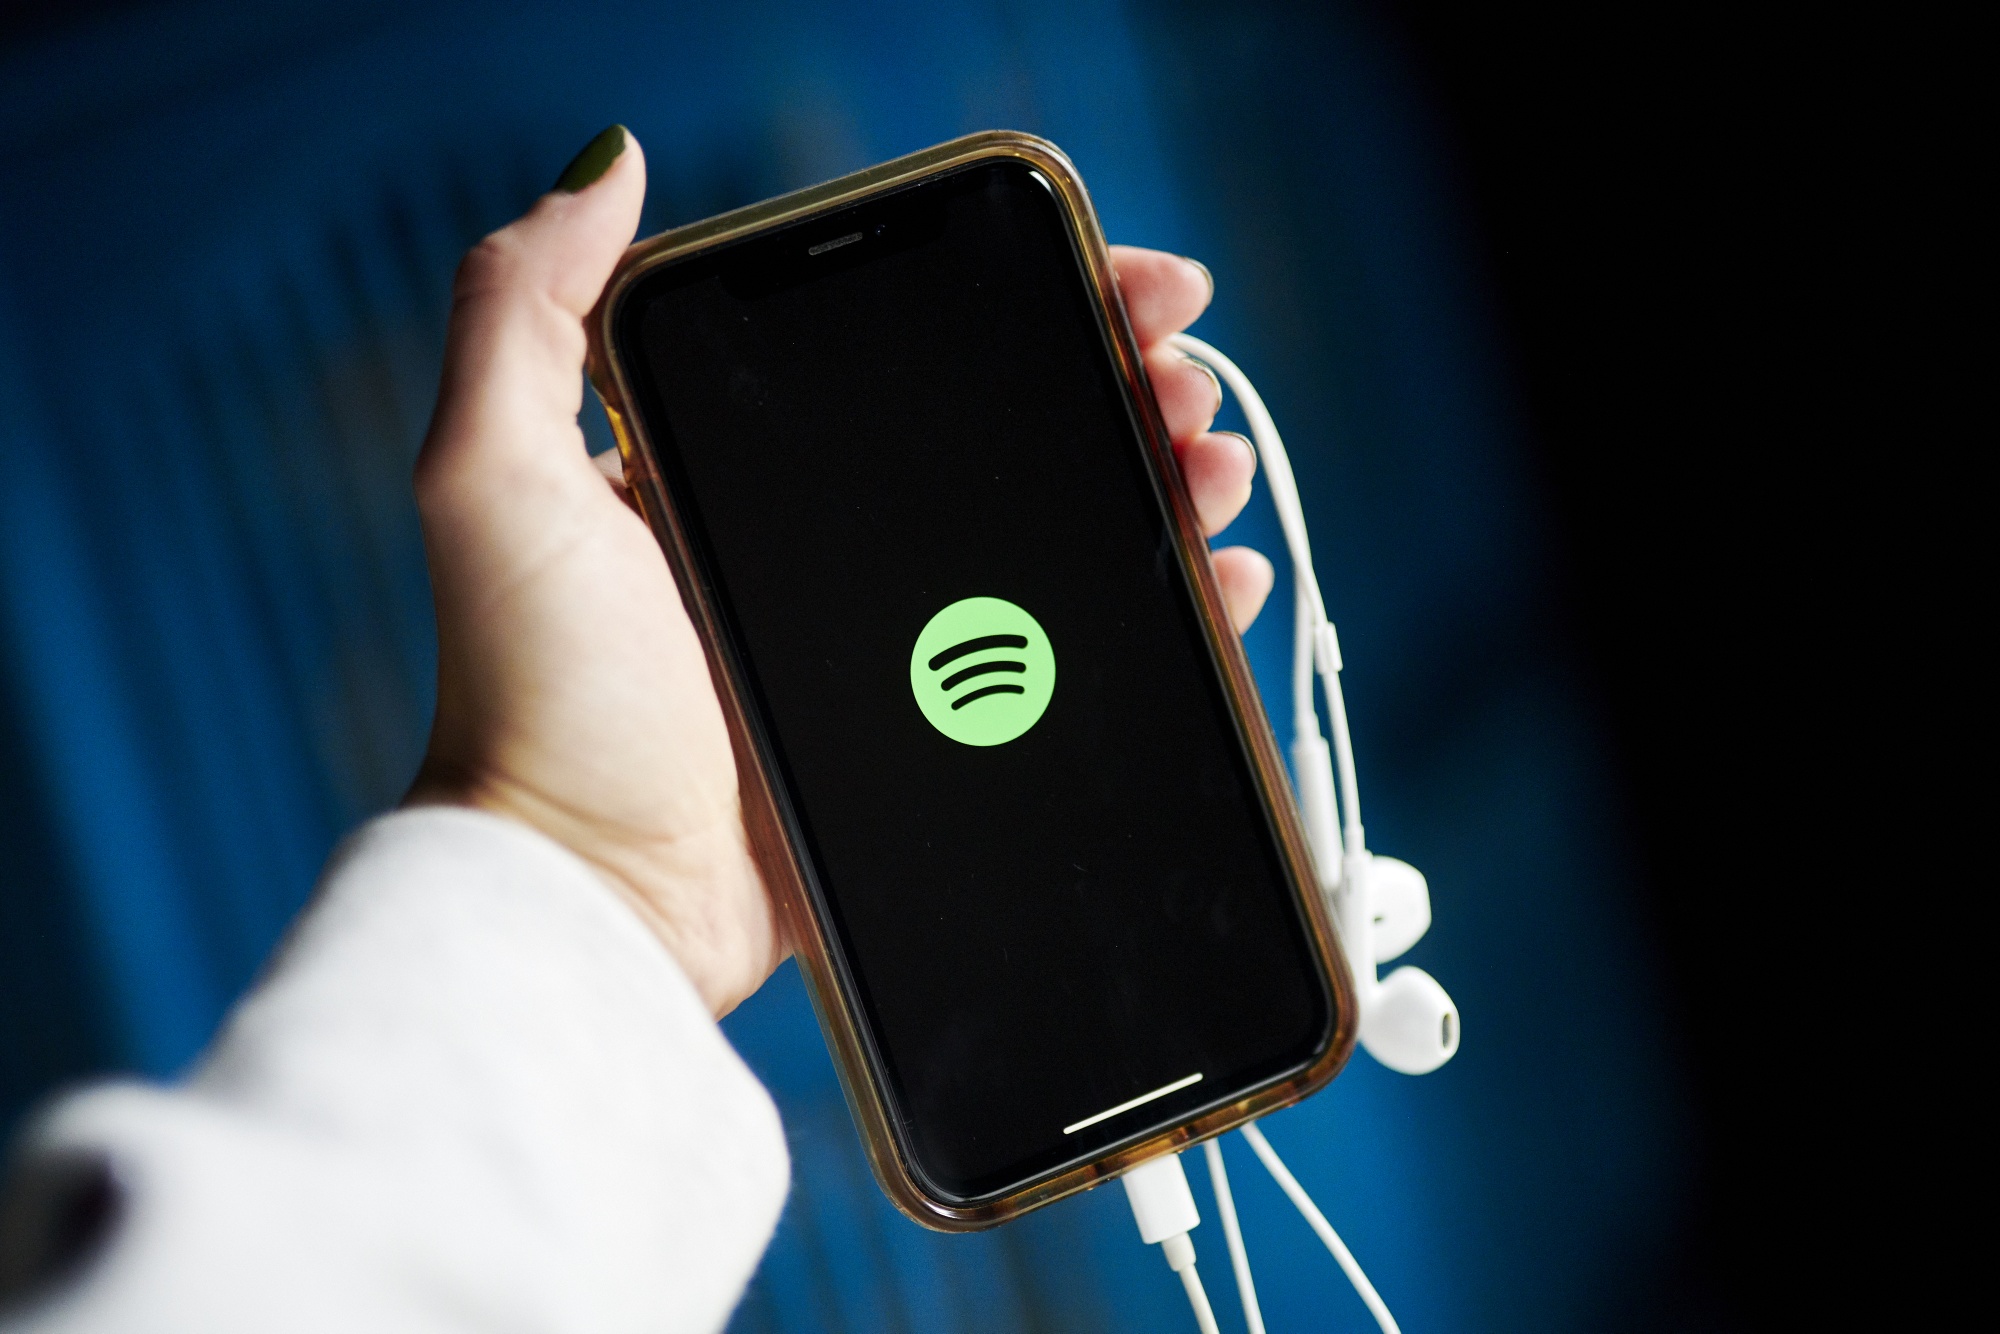 Spotify expands in audiobooks with the purchase of Findaway